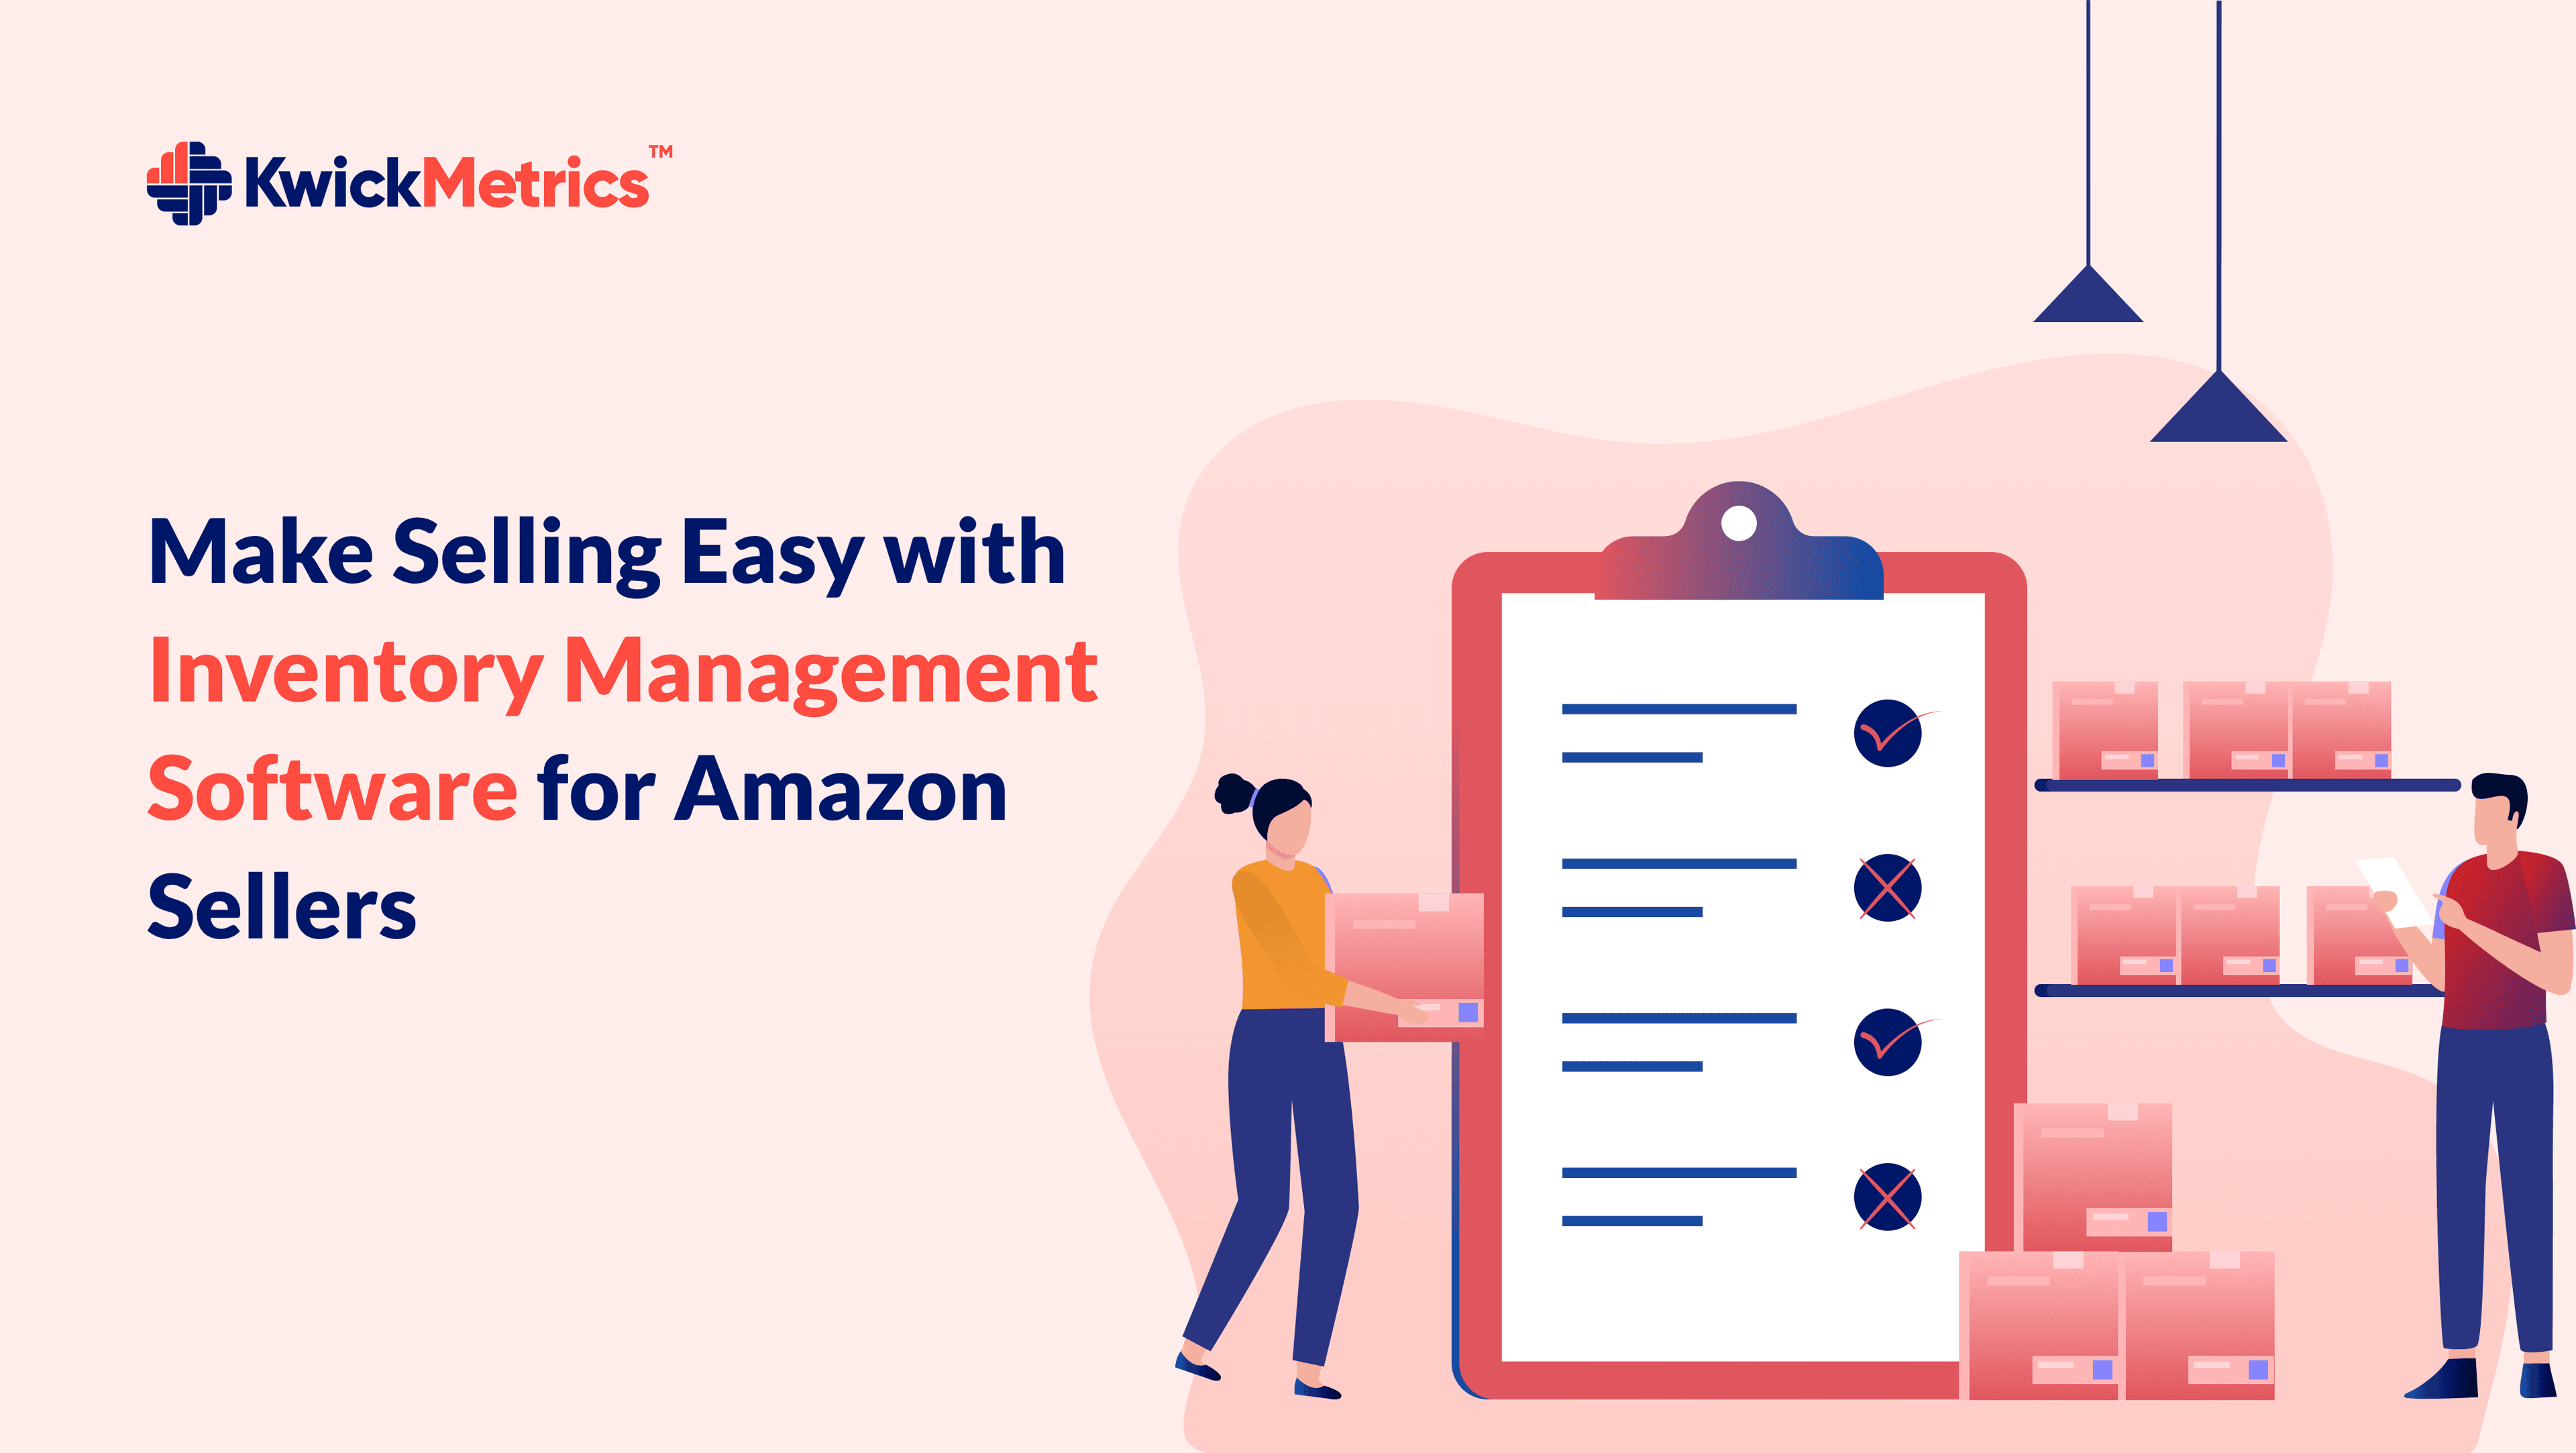 Make Selling Easy With Inventory Management Software for Amazon Sellers